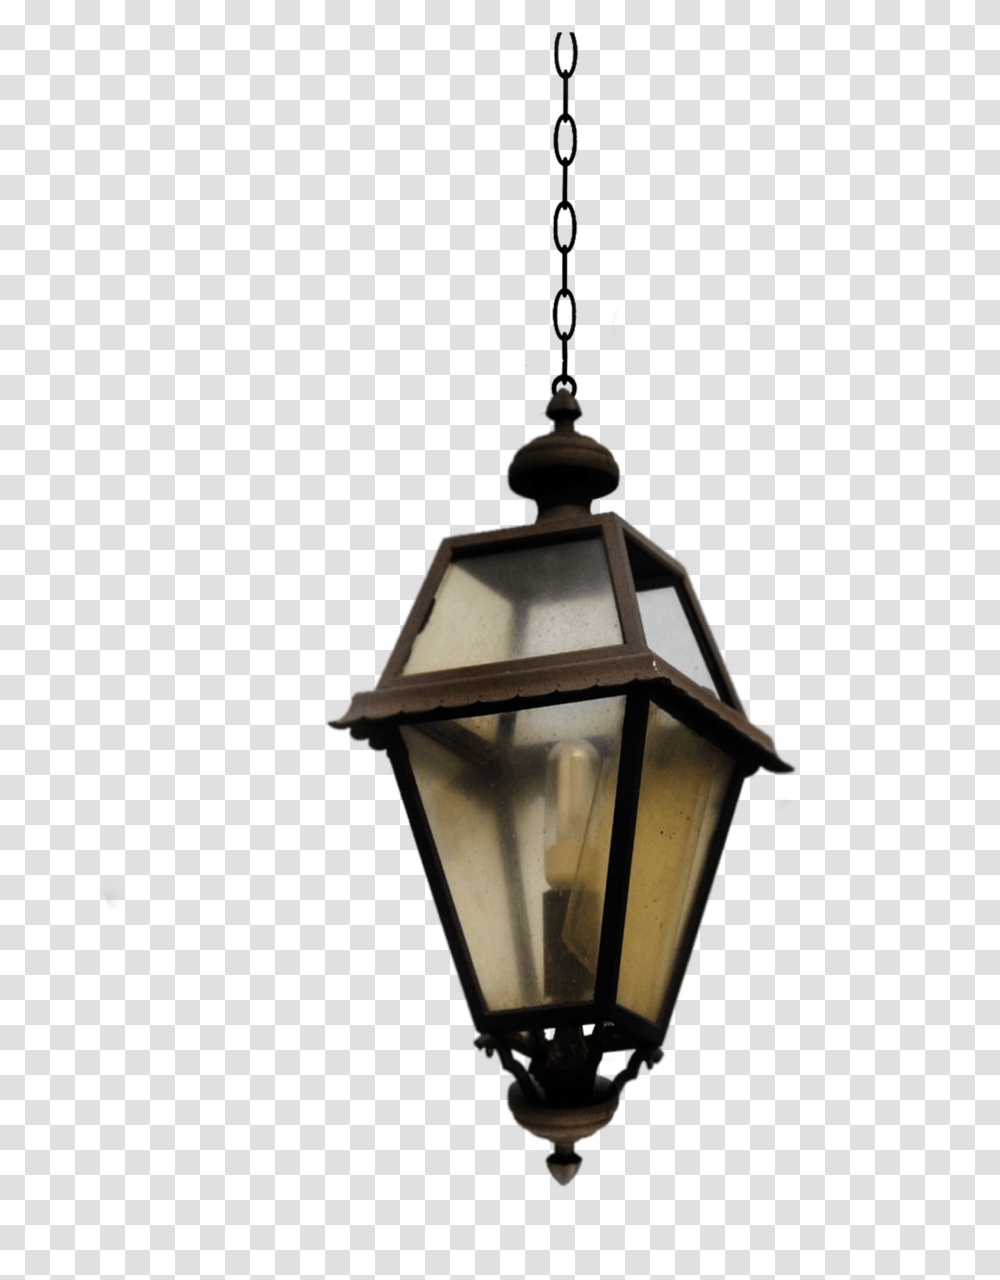 Discover Ideas About Building Illustration Street Light, Lamp, Lampshade, Lantern Transparent Png